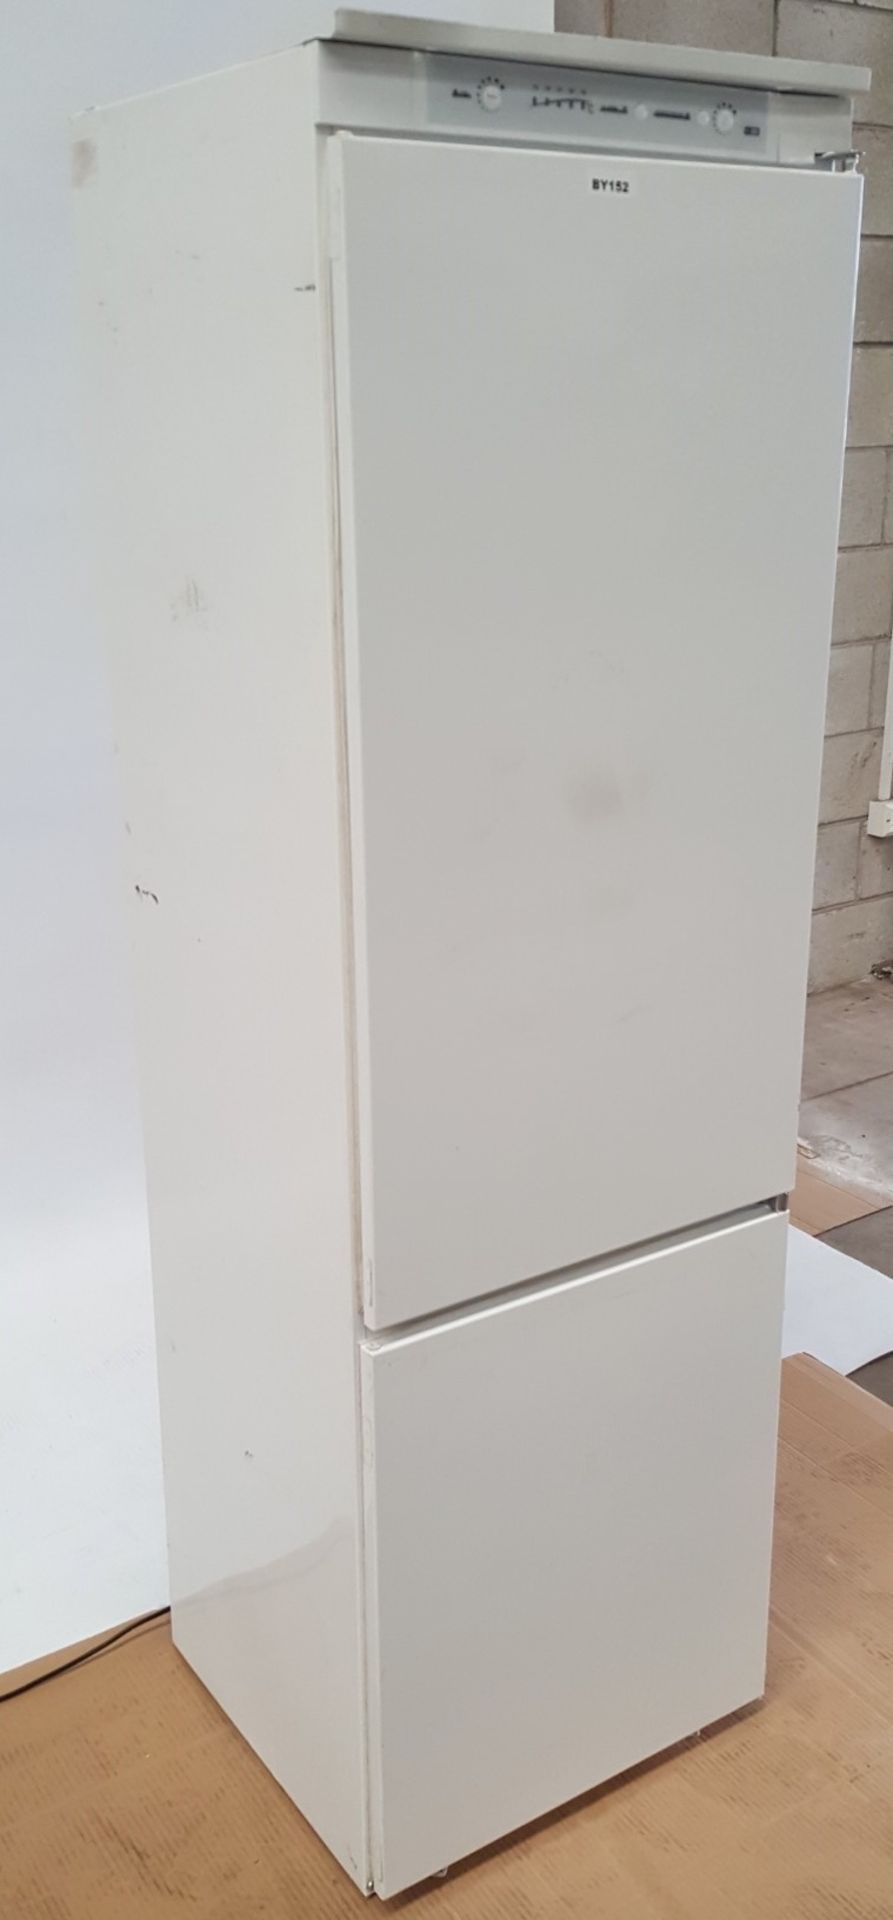 1 x Prima Integrated 70/30 Frost Free Fridge Freezer LPR472A1 - Ref BY152 - Image 6 of 7